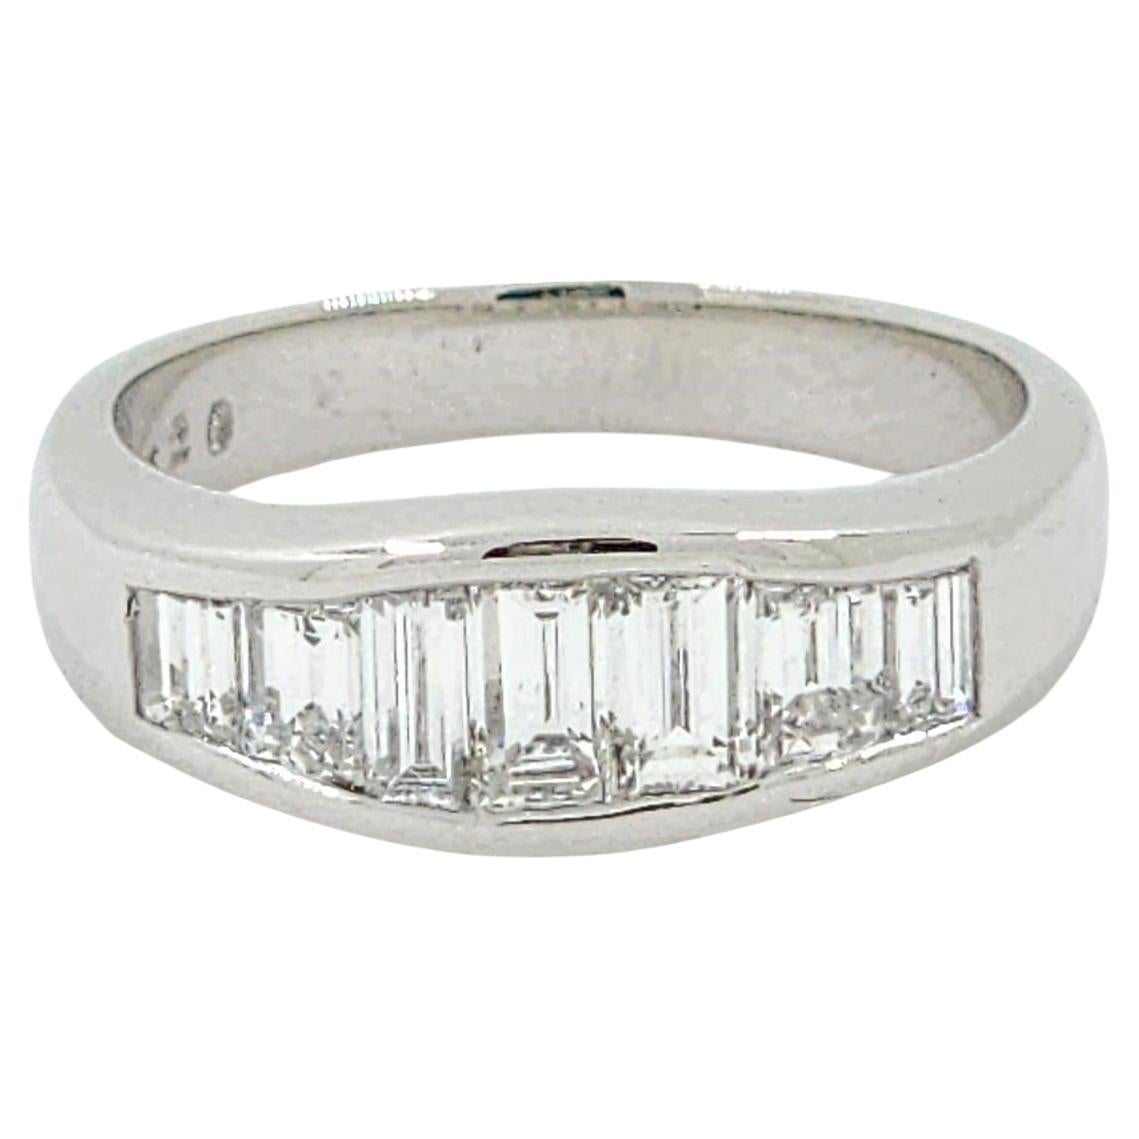 1.20Ct Baguette Diamond Wedding Band Ring in 18K White Gold For Sale